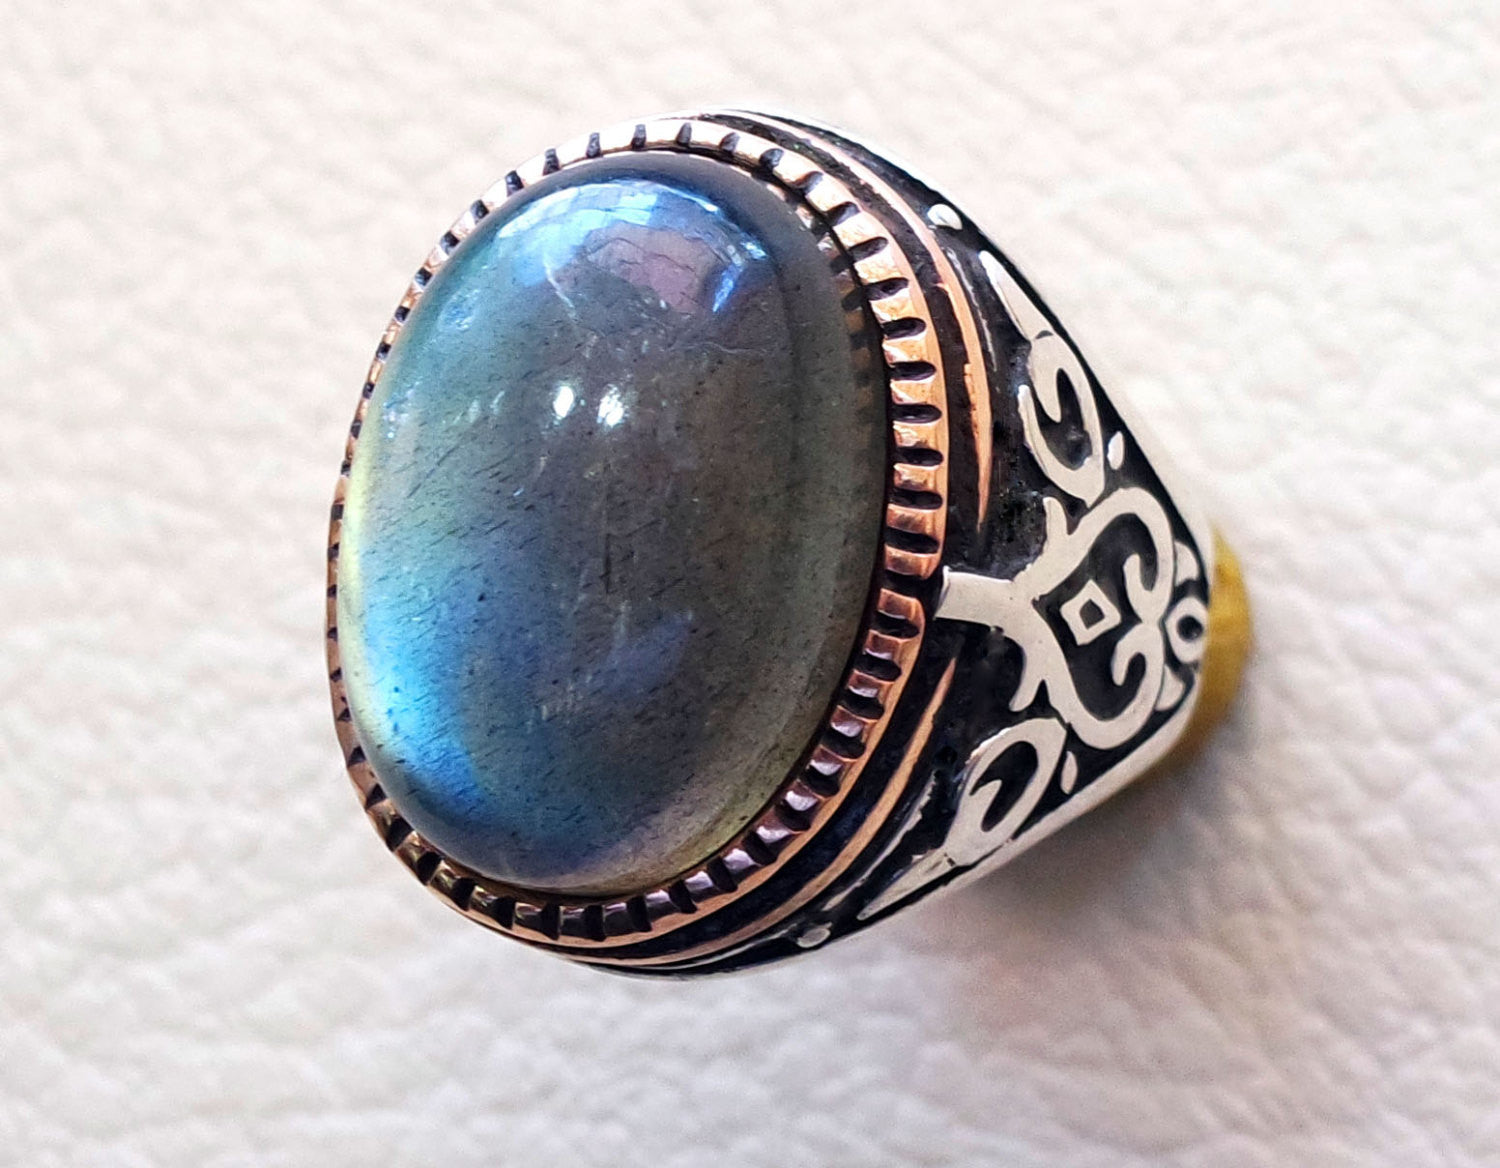 Labradorite natural stone green grey semi precious stone heavy man ring sterling silver 925 bronze frame any sizes jewelry fast shipping